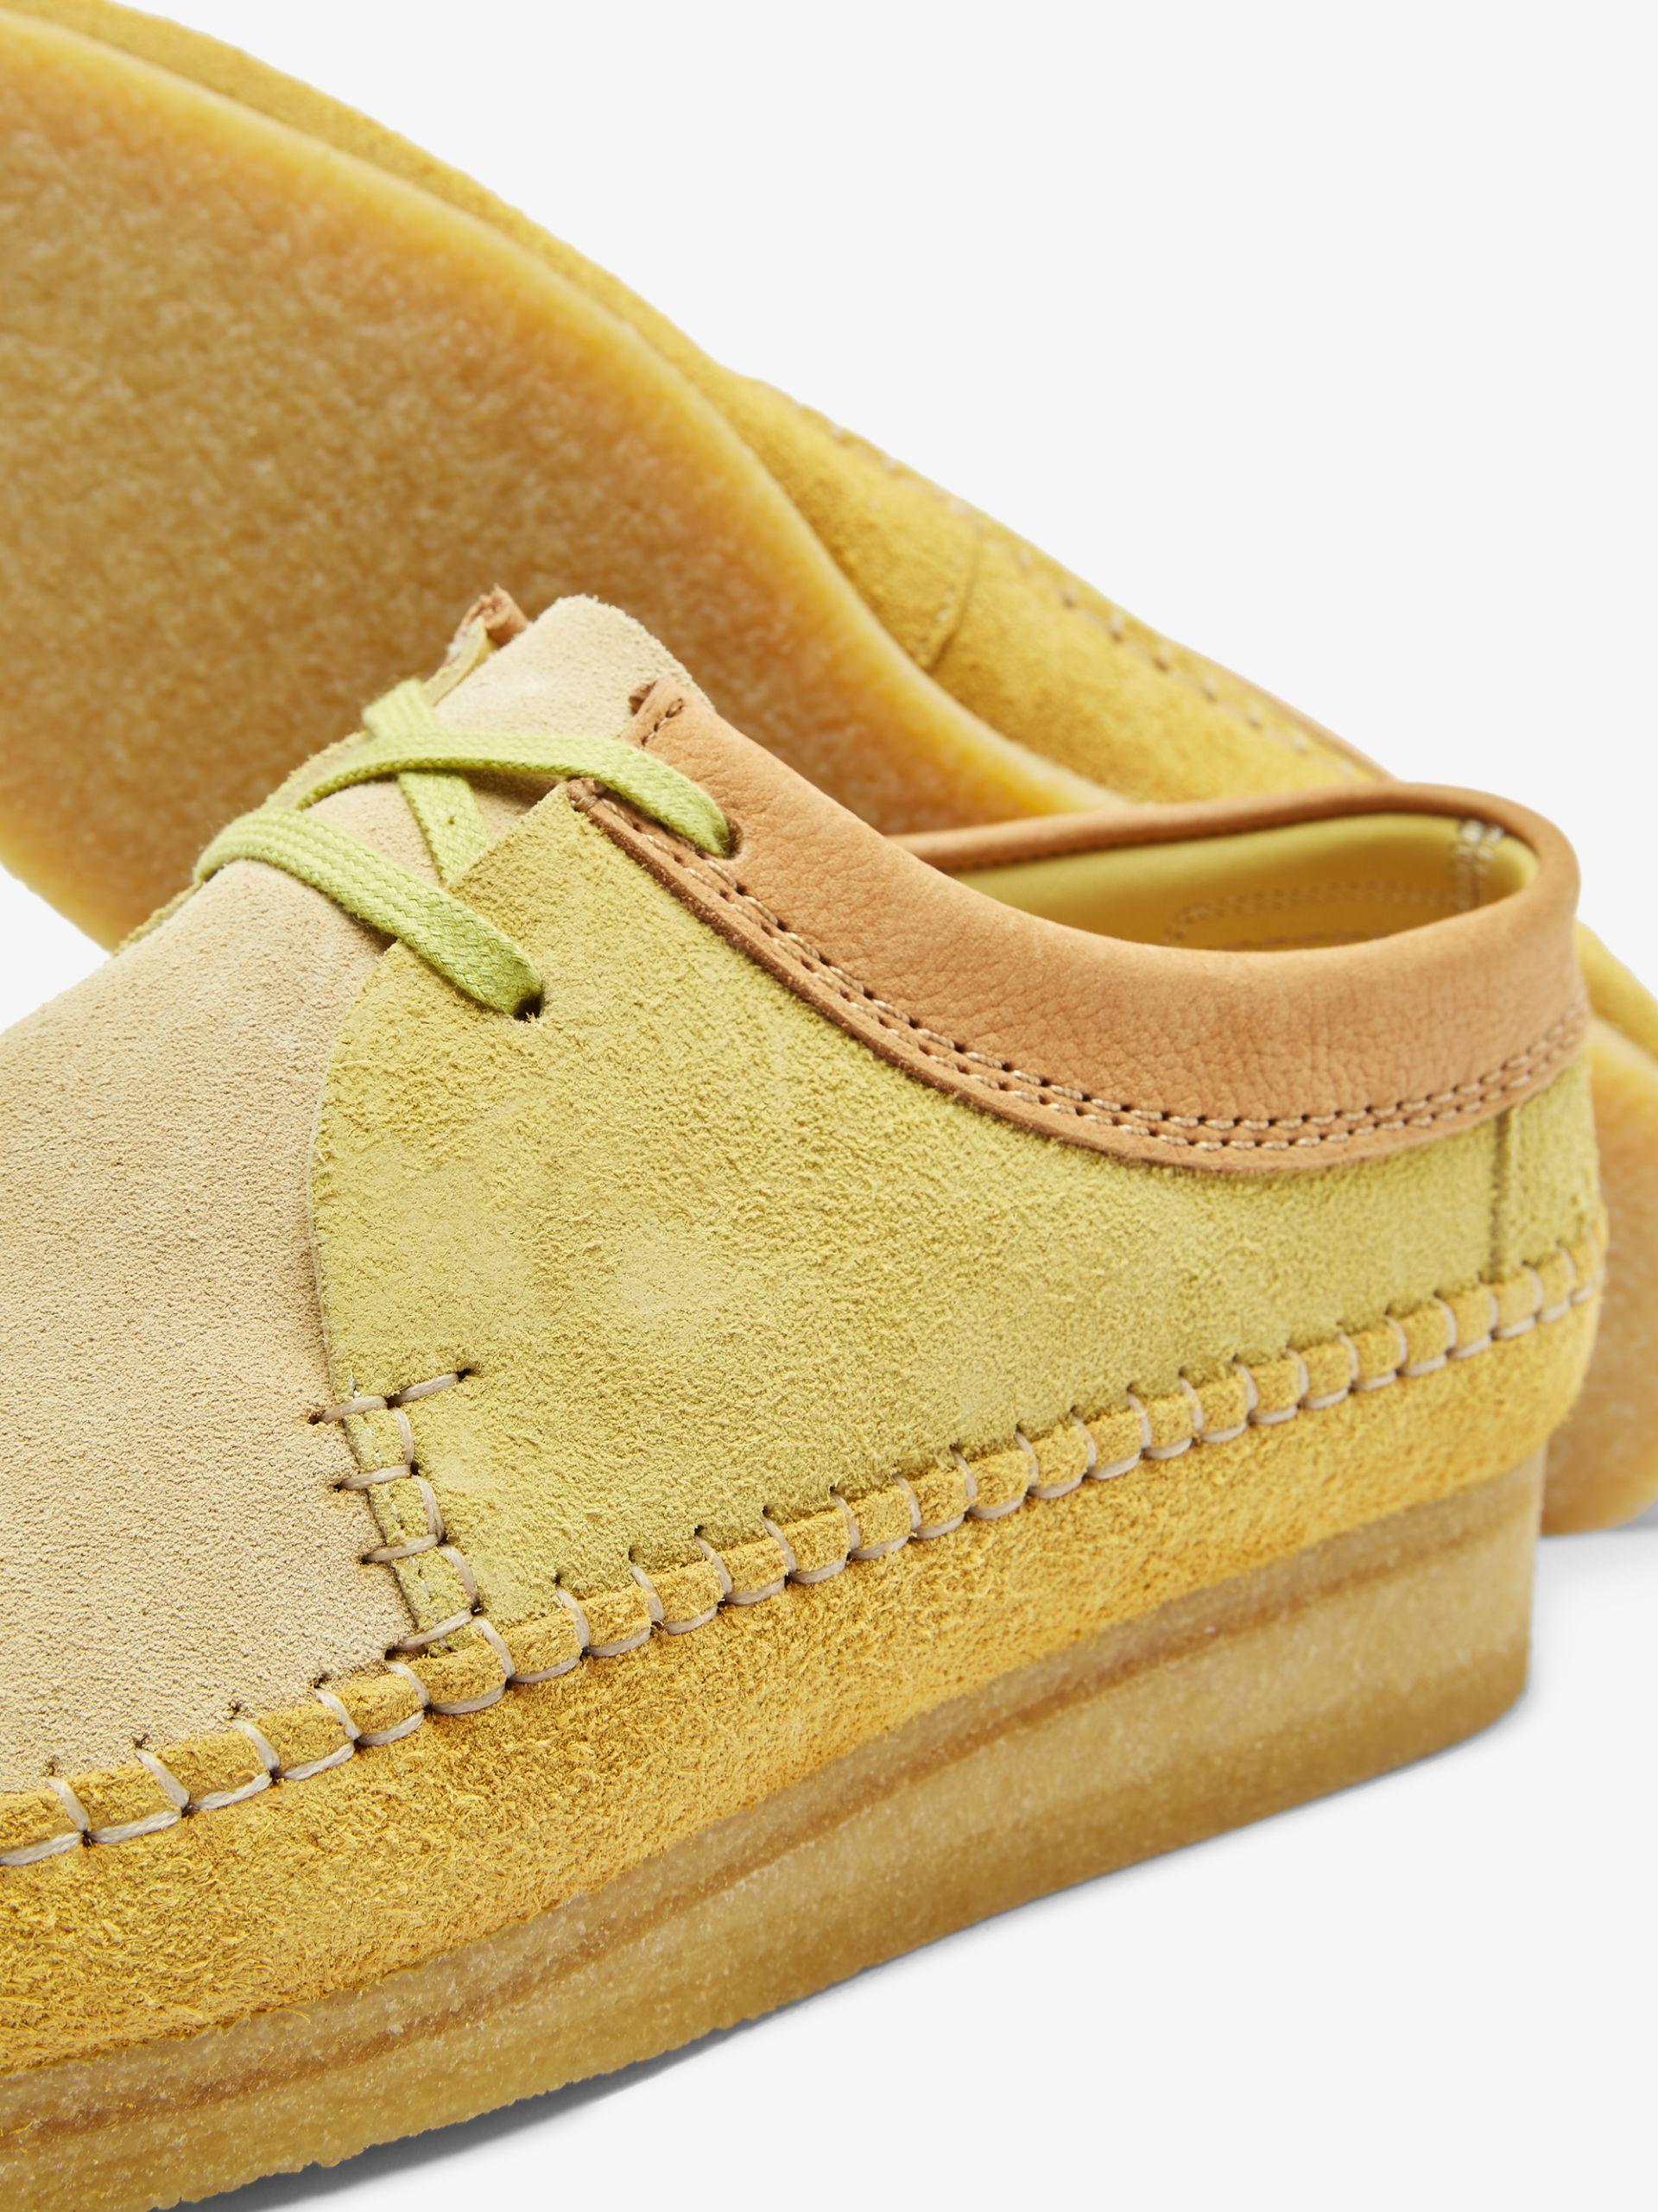 Clarks X Levis Weaver Suede Shoes in Yellow for Men - Lyst